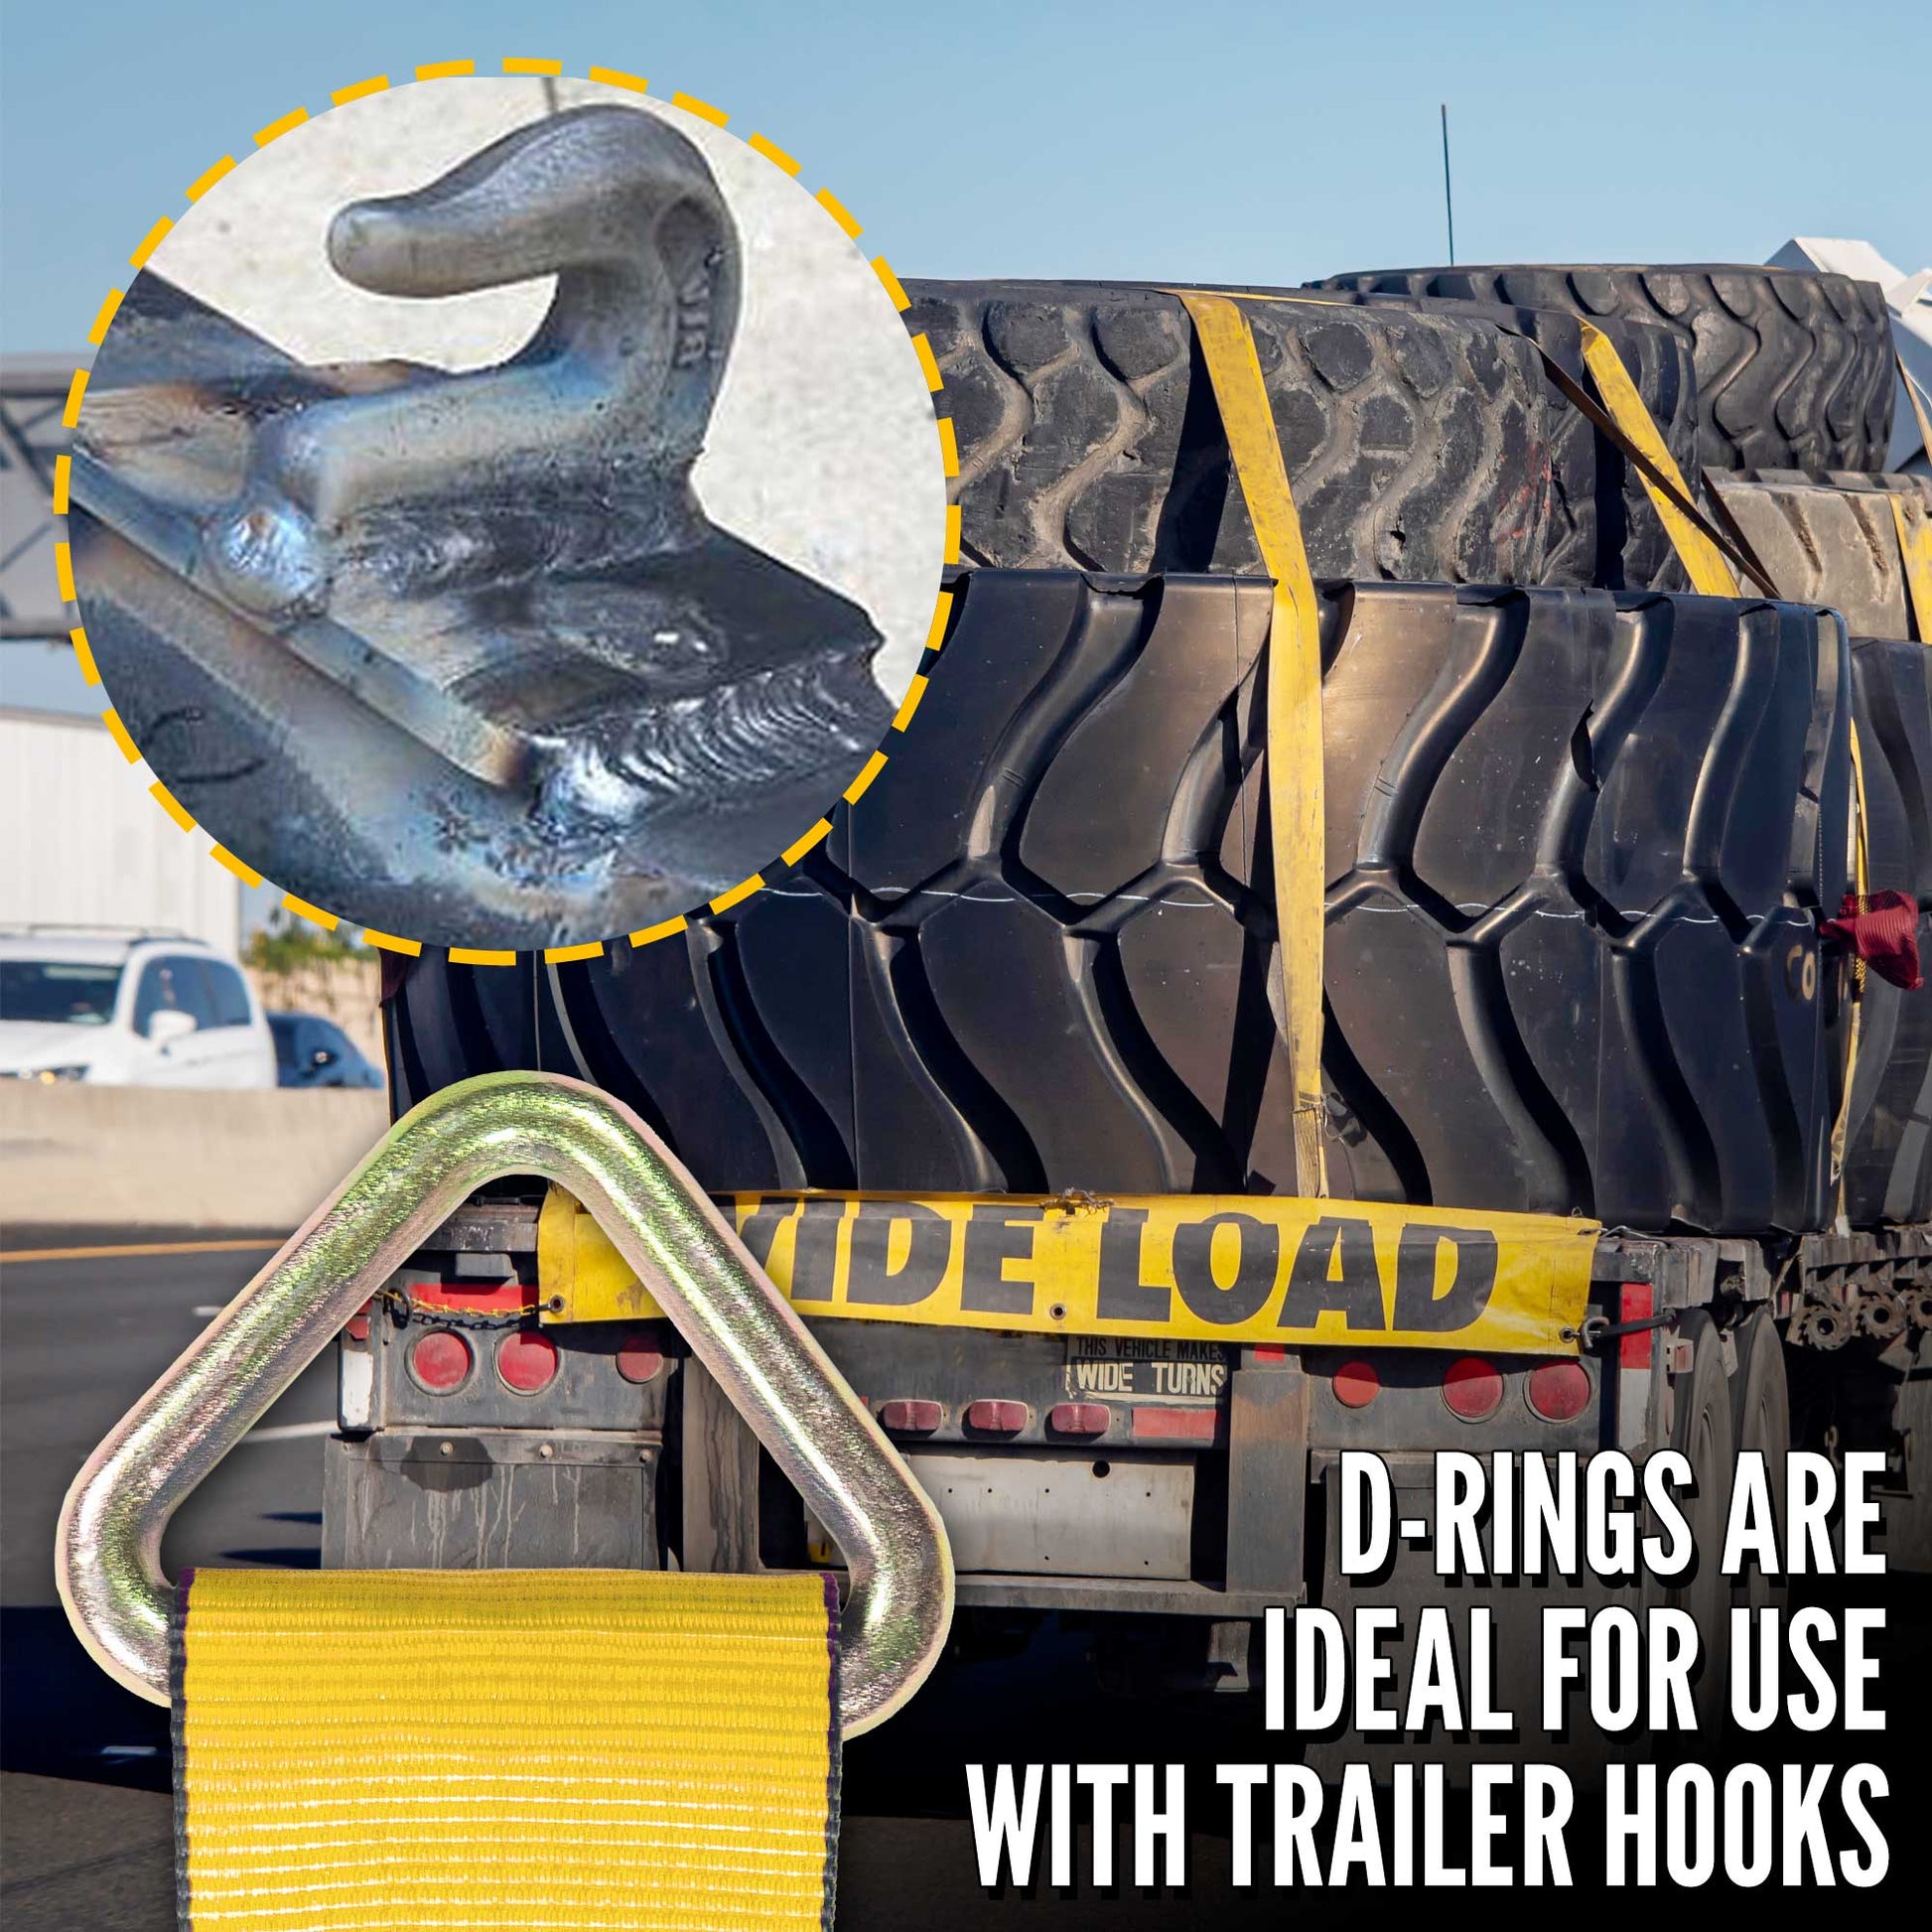 27' D ring straps are ideal for use with trailer hooks